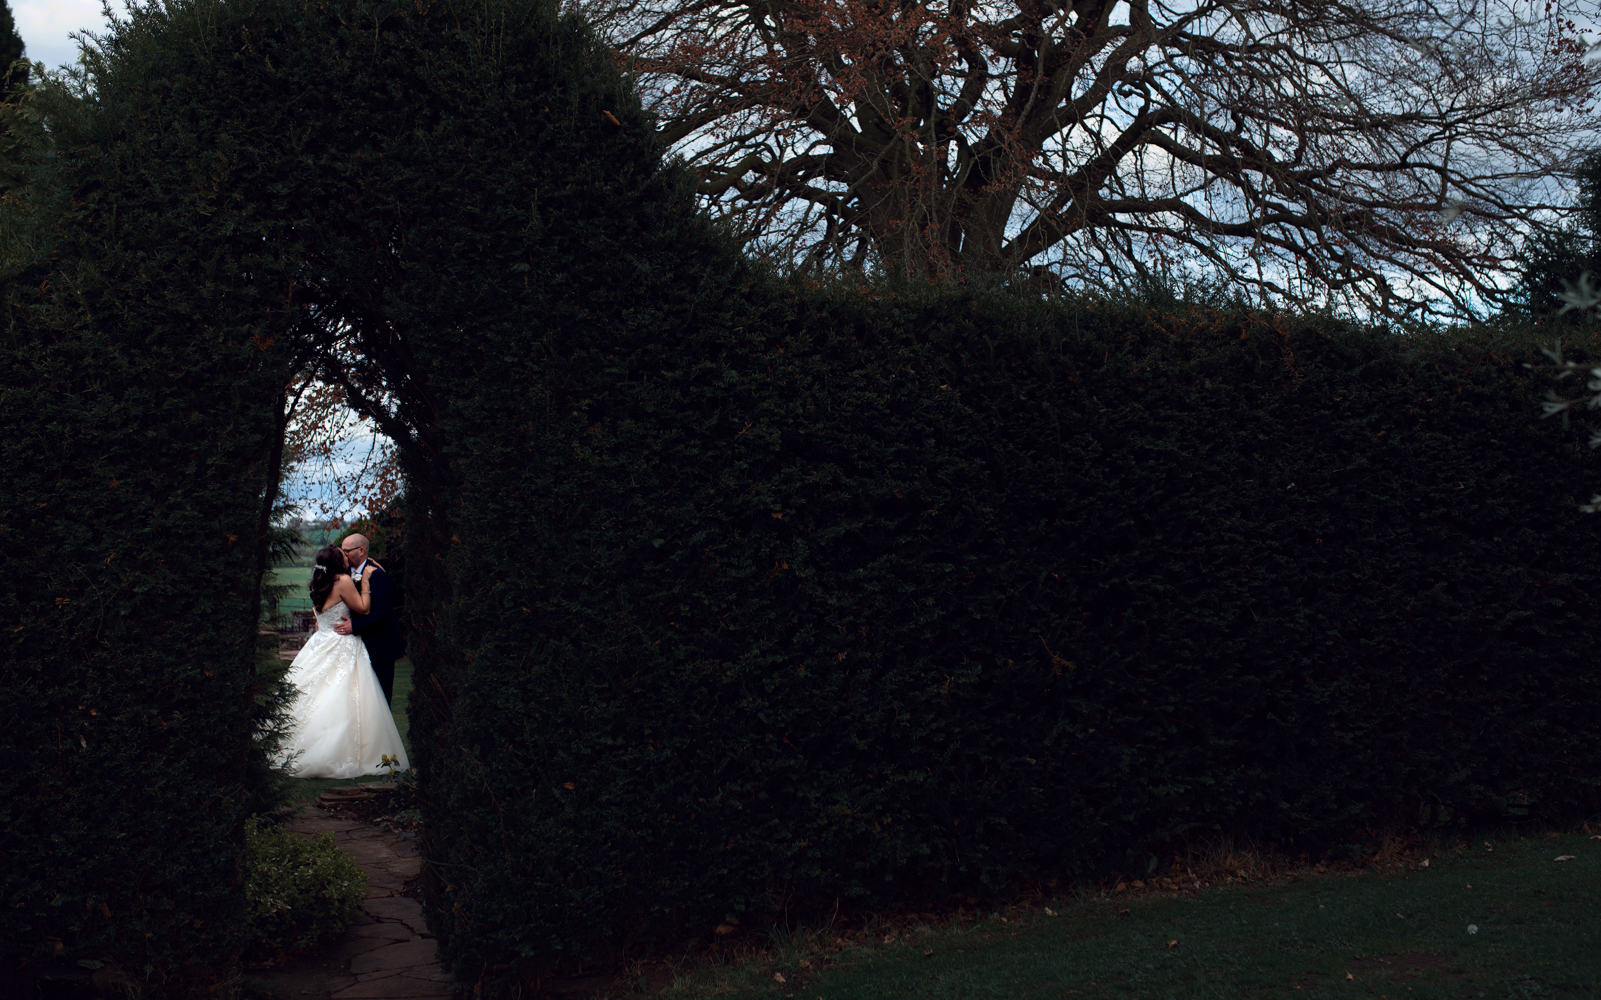 The bride and groom through a gap in the hedge during couples portrait session